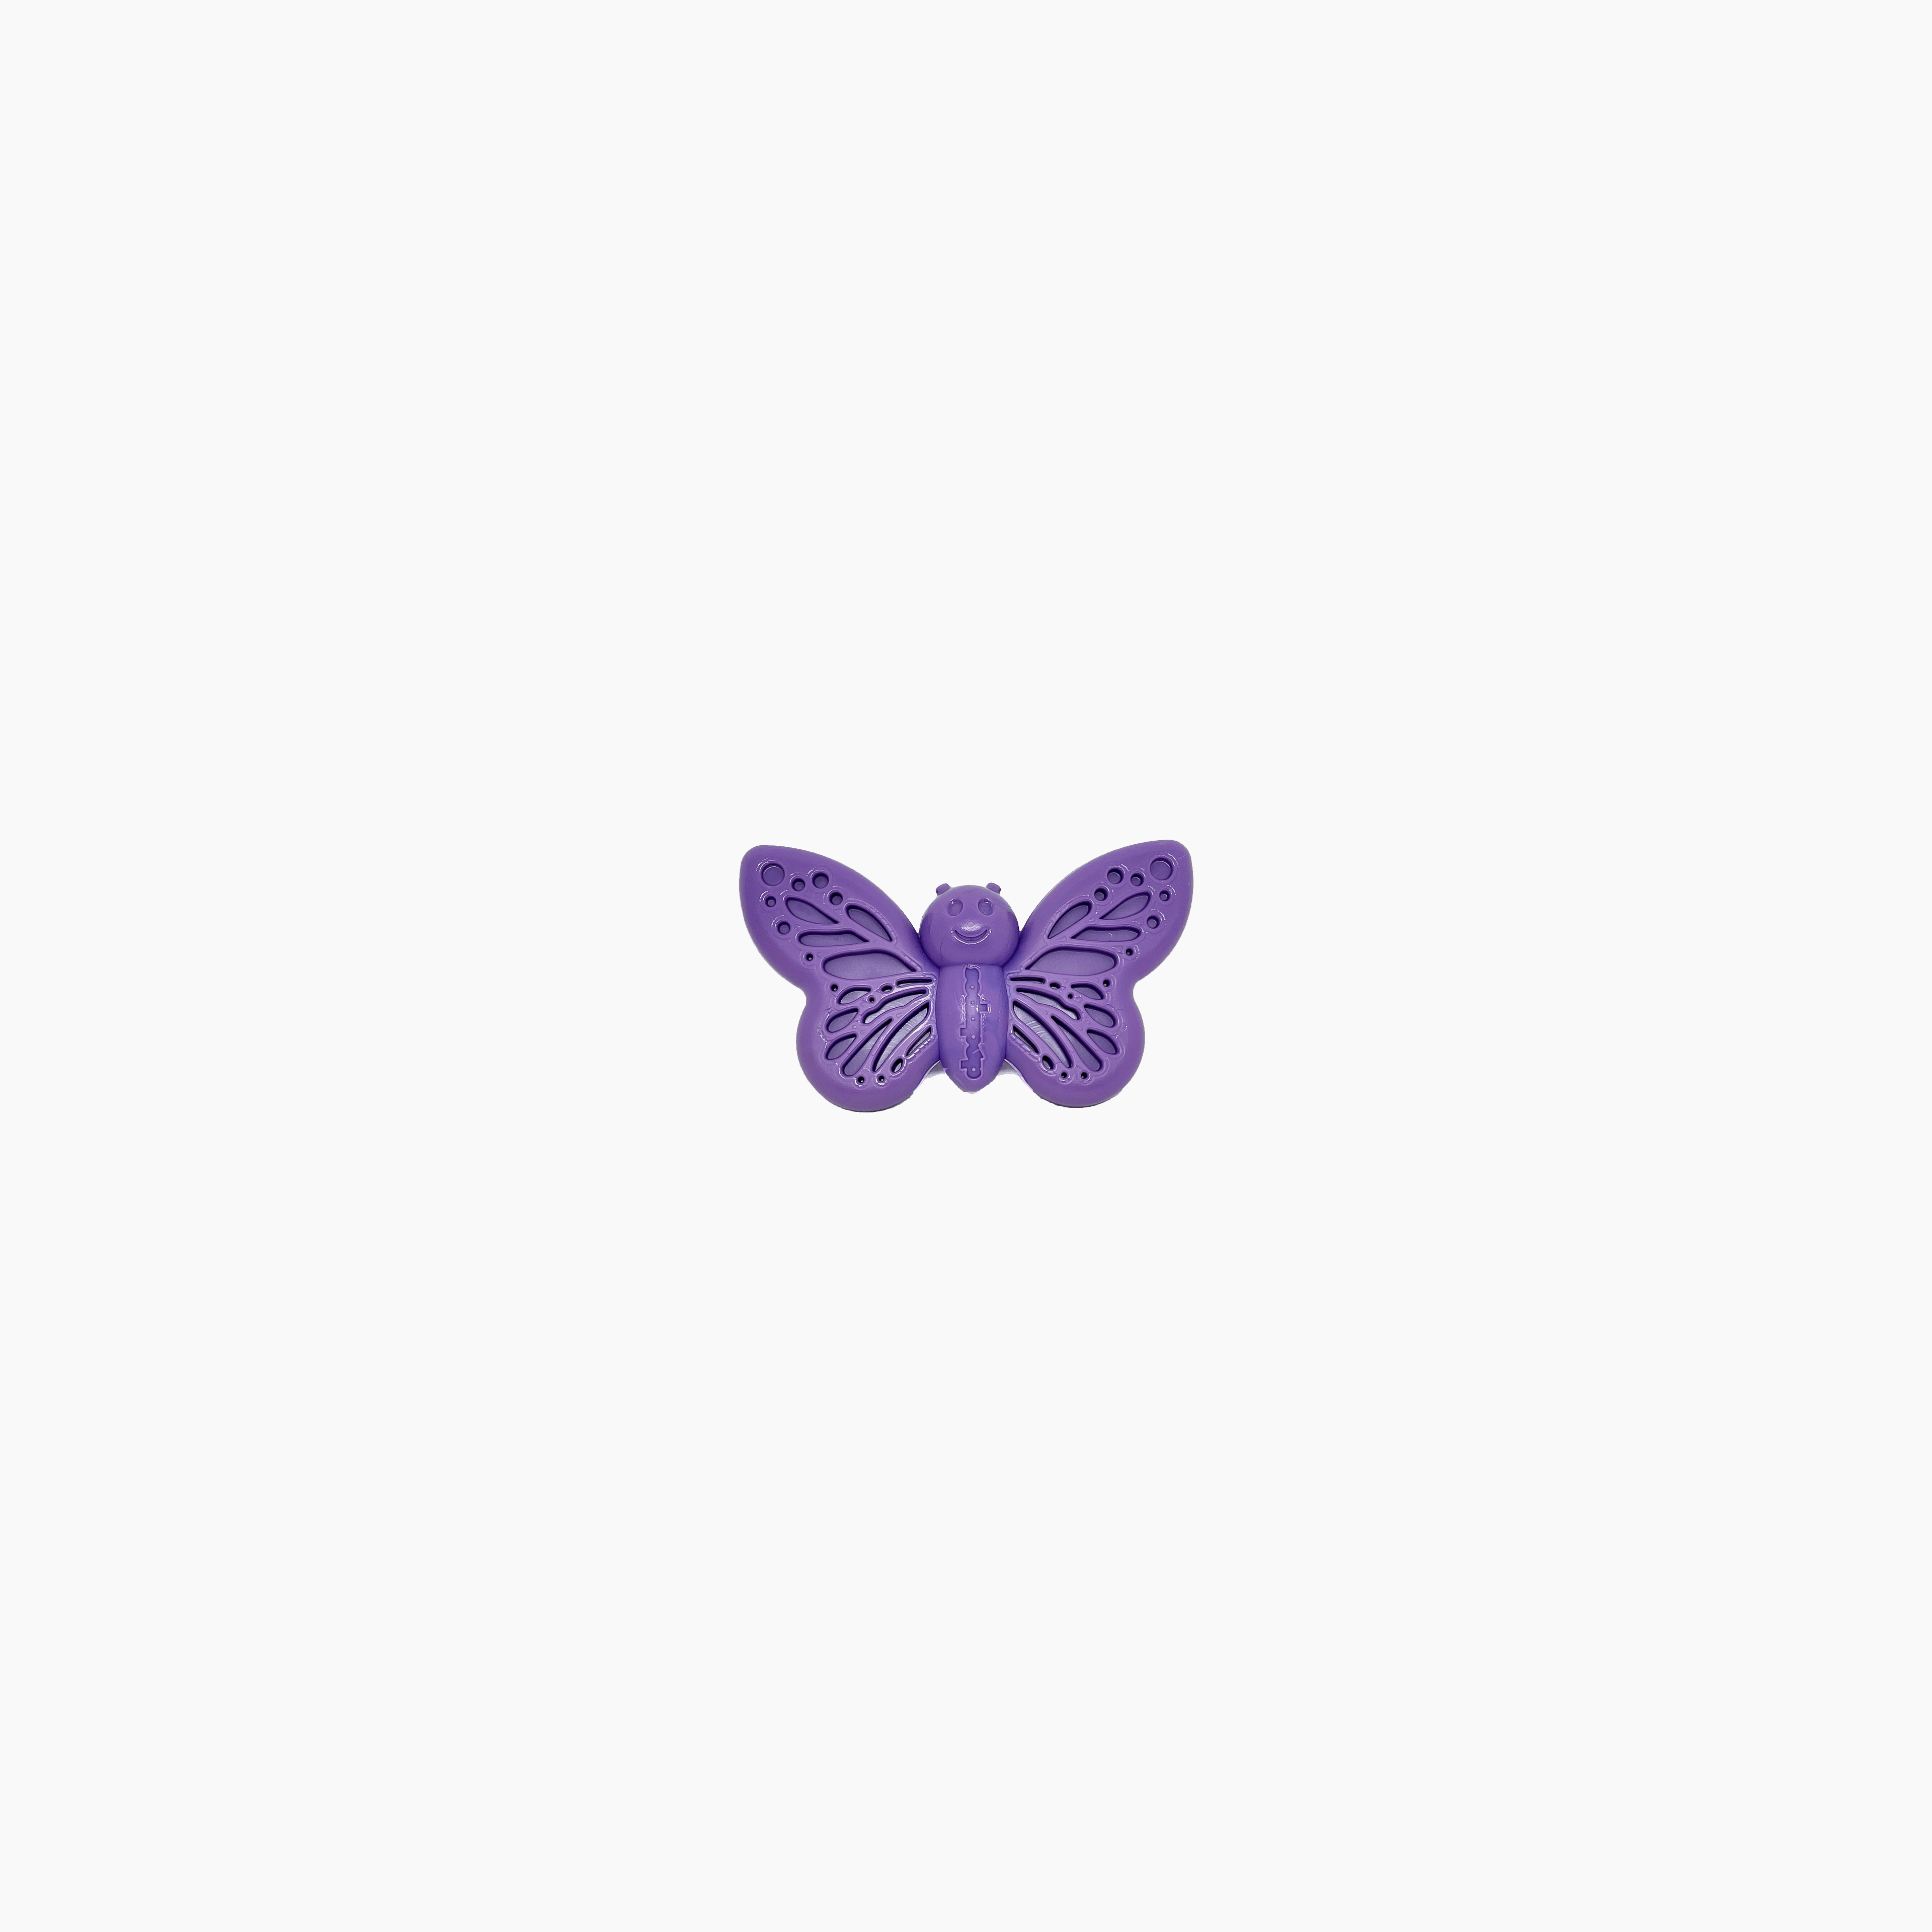 Butterfly Durable Nylon Chew and Enrichment Toy